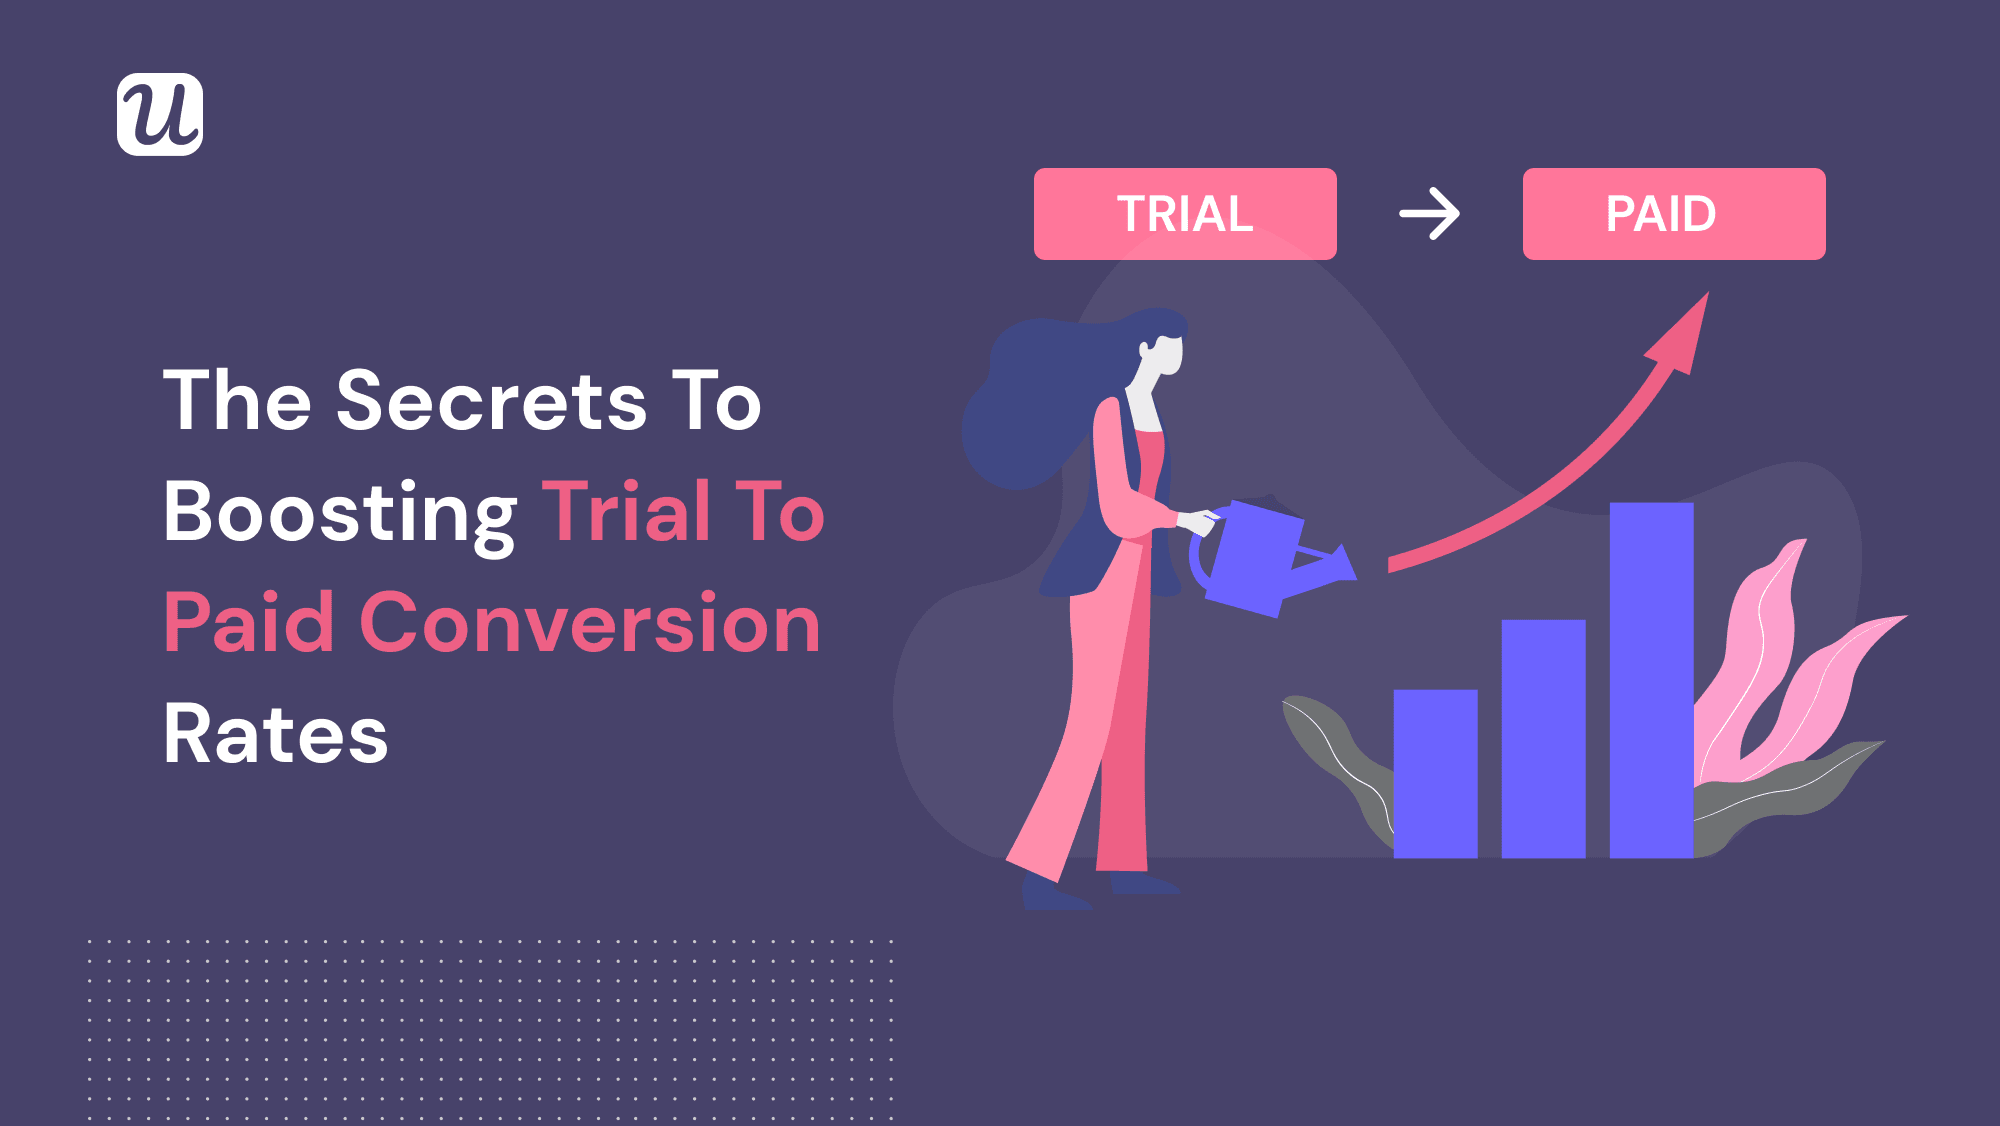 How We Were Able to Boost Trial to Paid Conversions by 4% - And How You Can Too